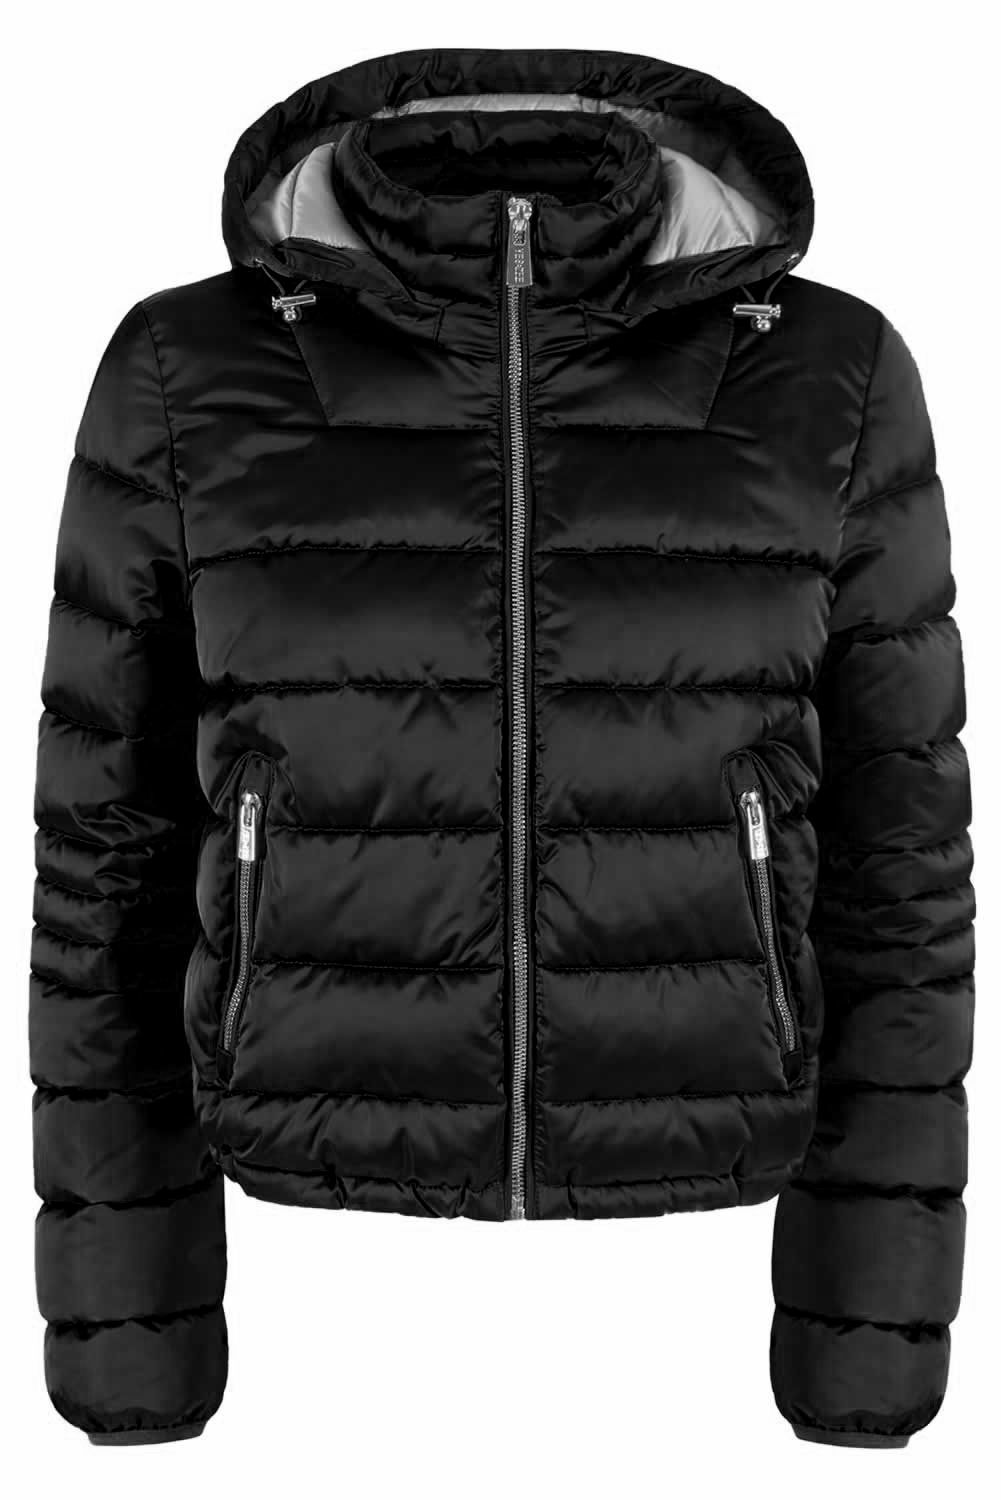 Chic Hooded Black Jacket with Logo Detail